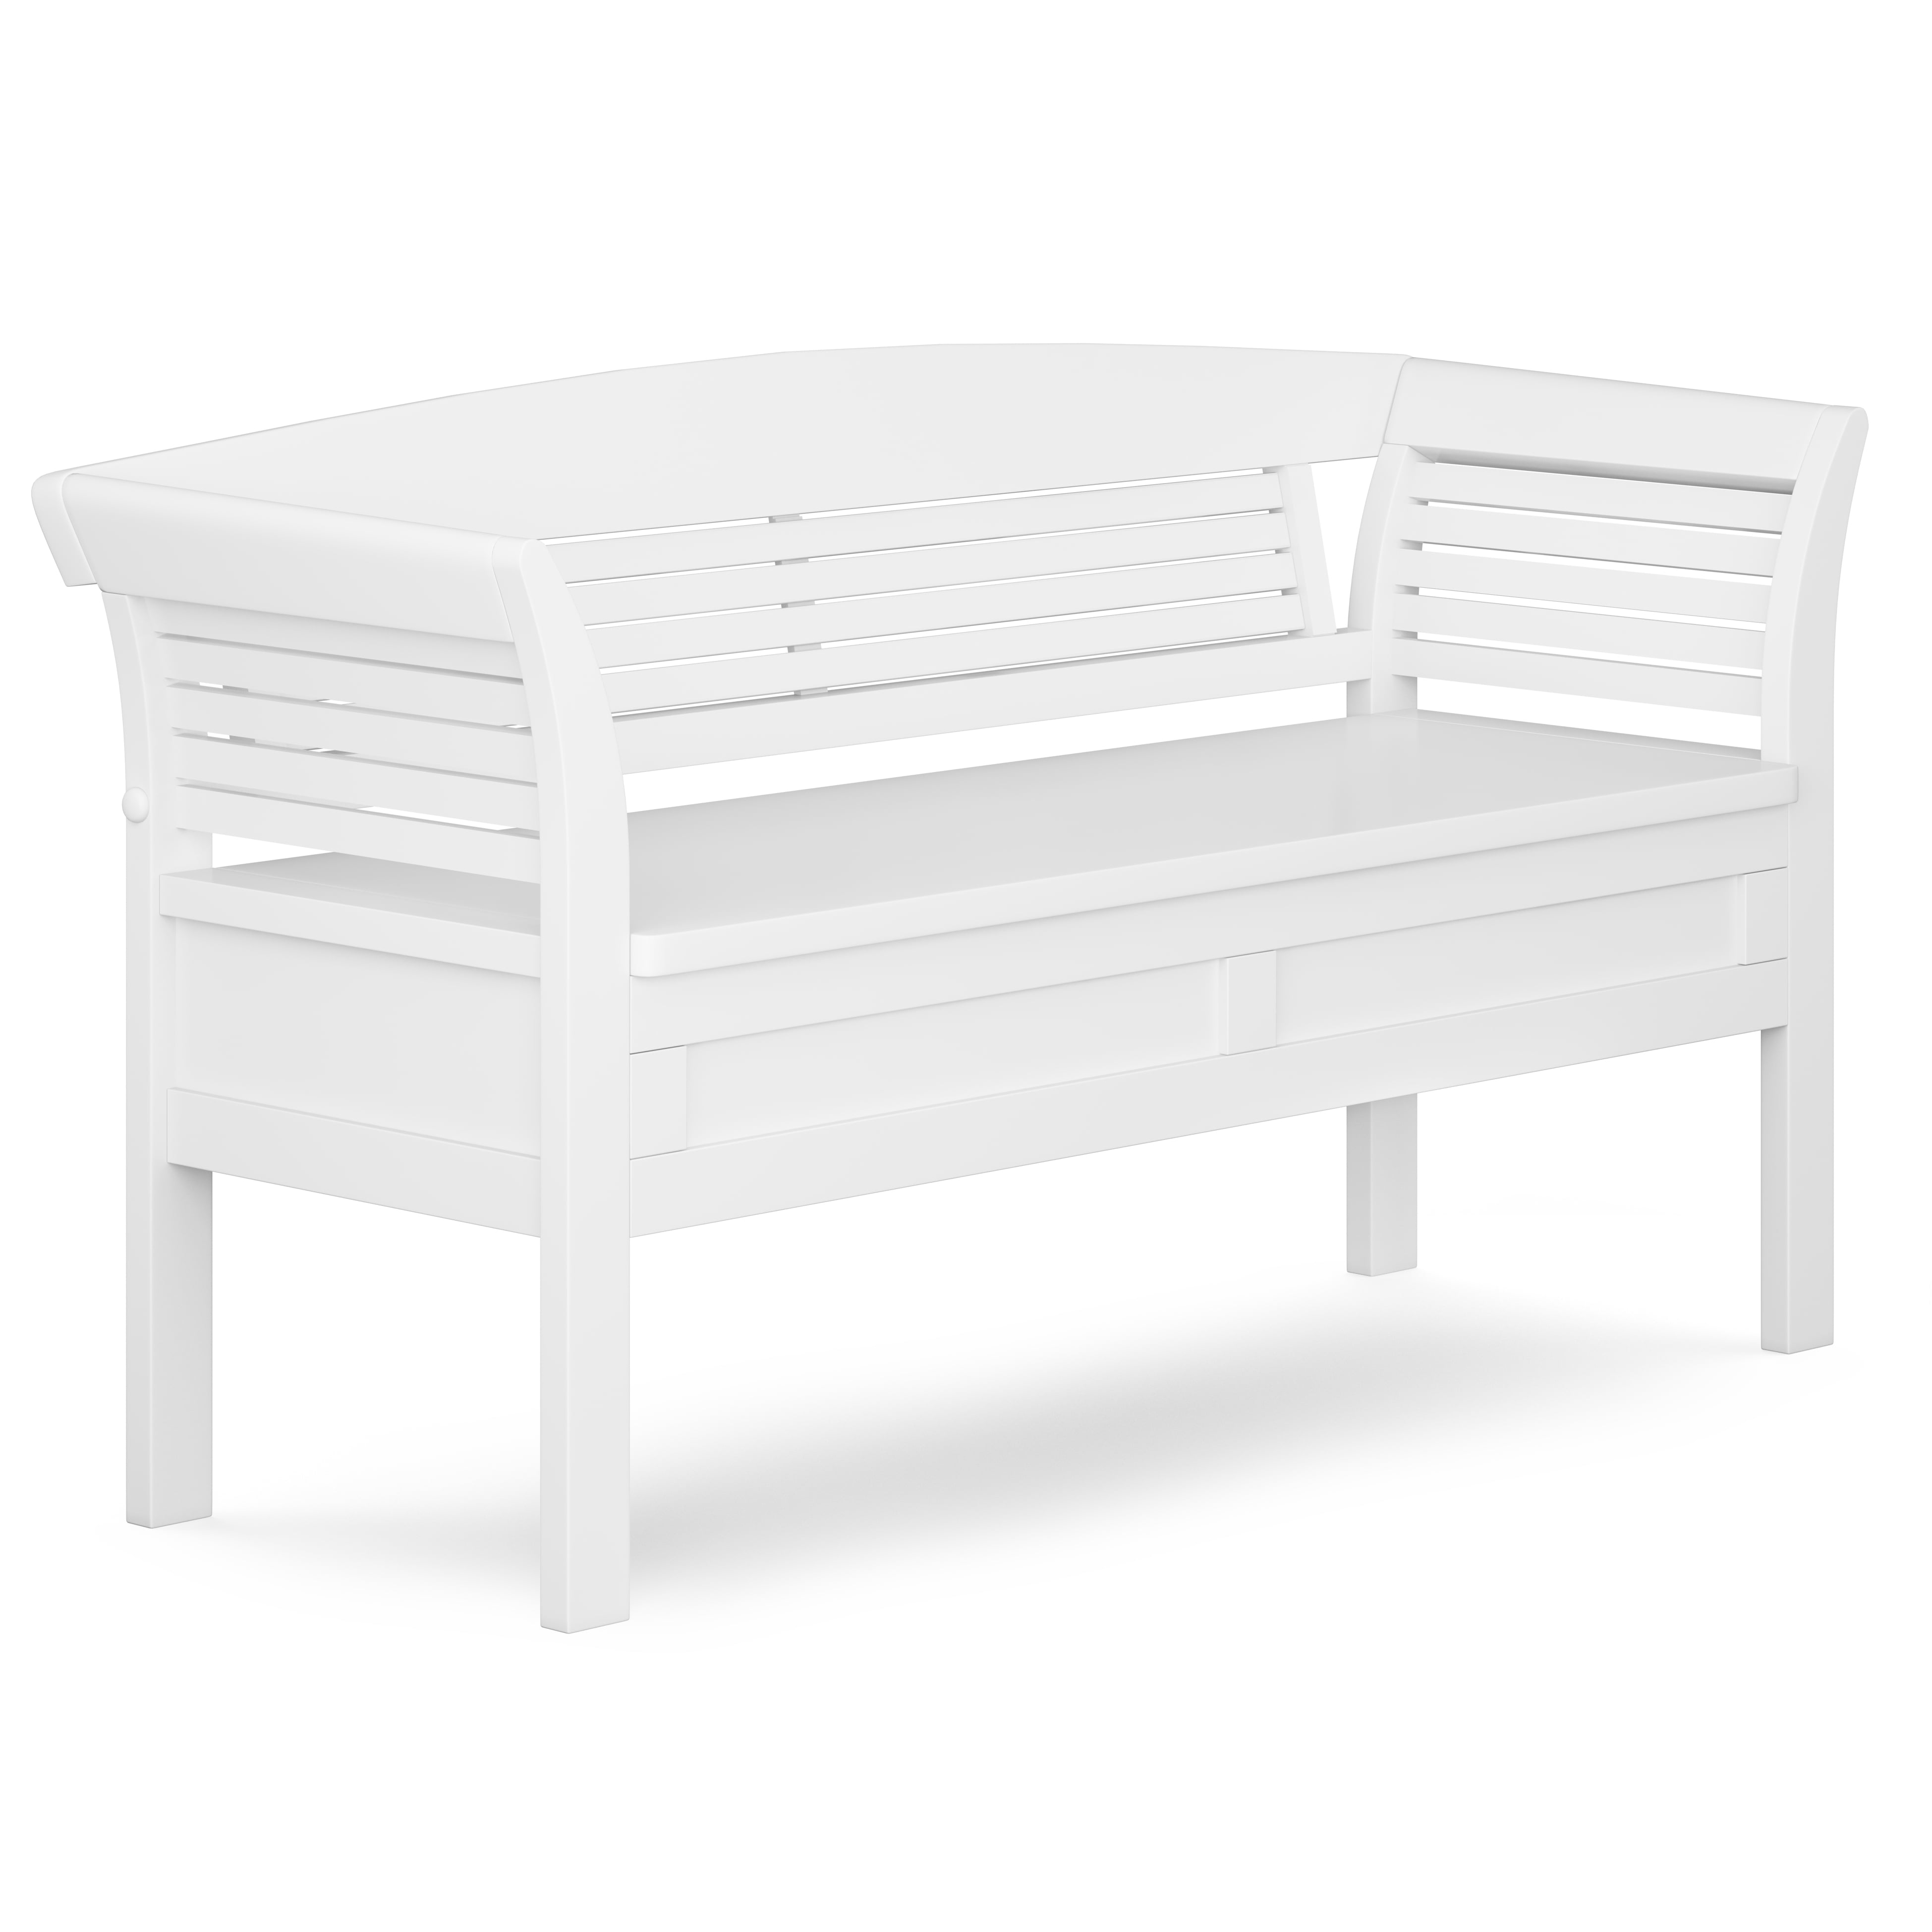 Arlington WOOD 49 inch Wide Contemporary Storage Bench in White -